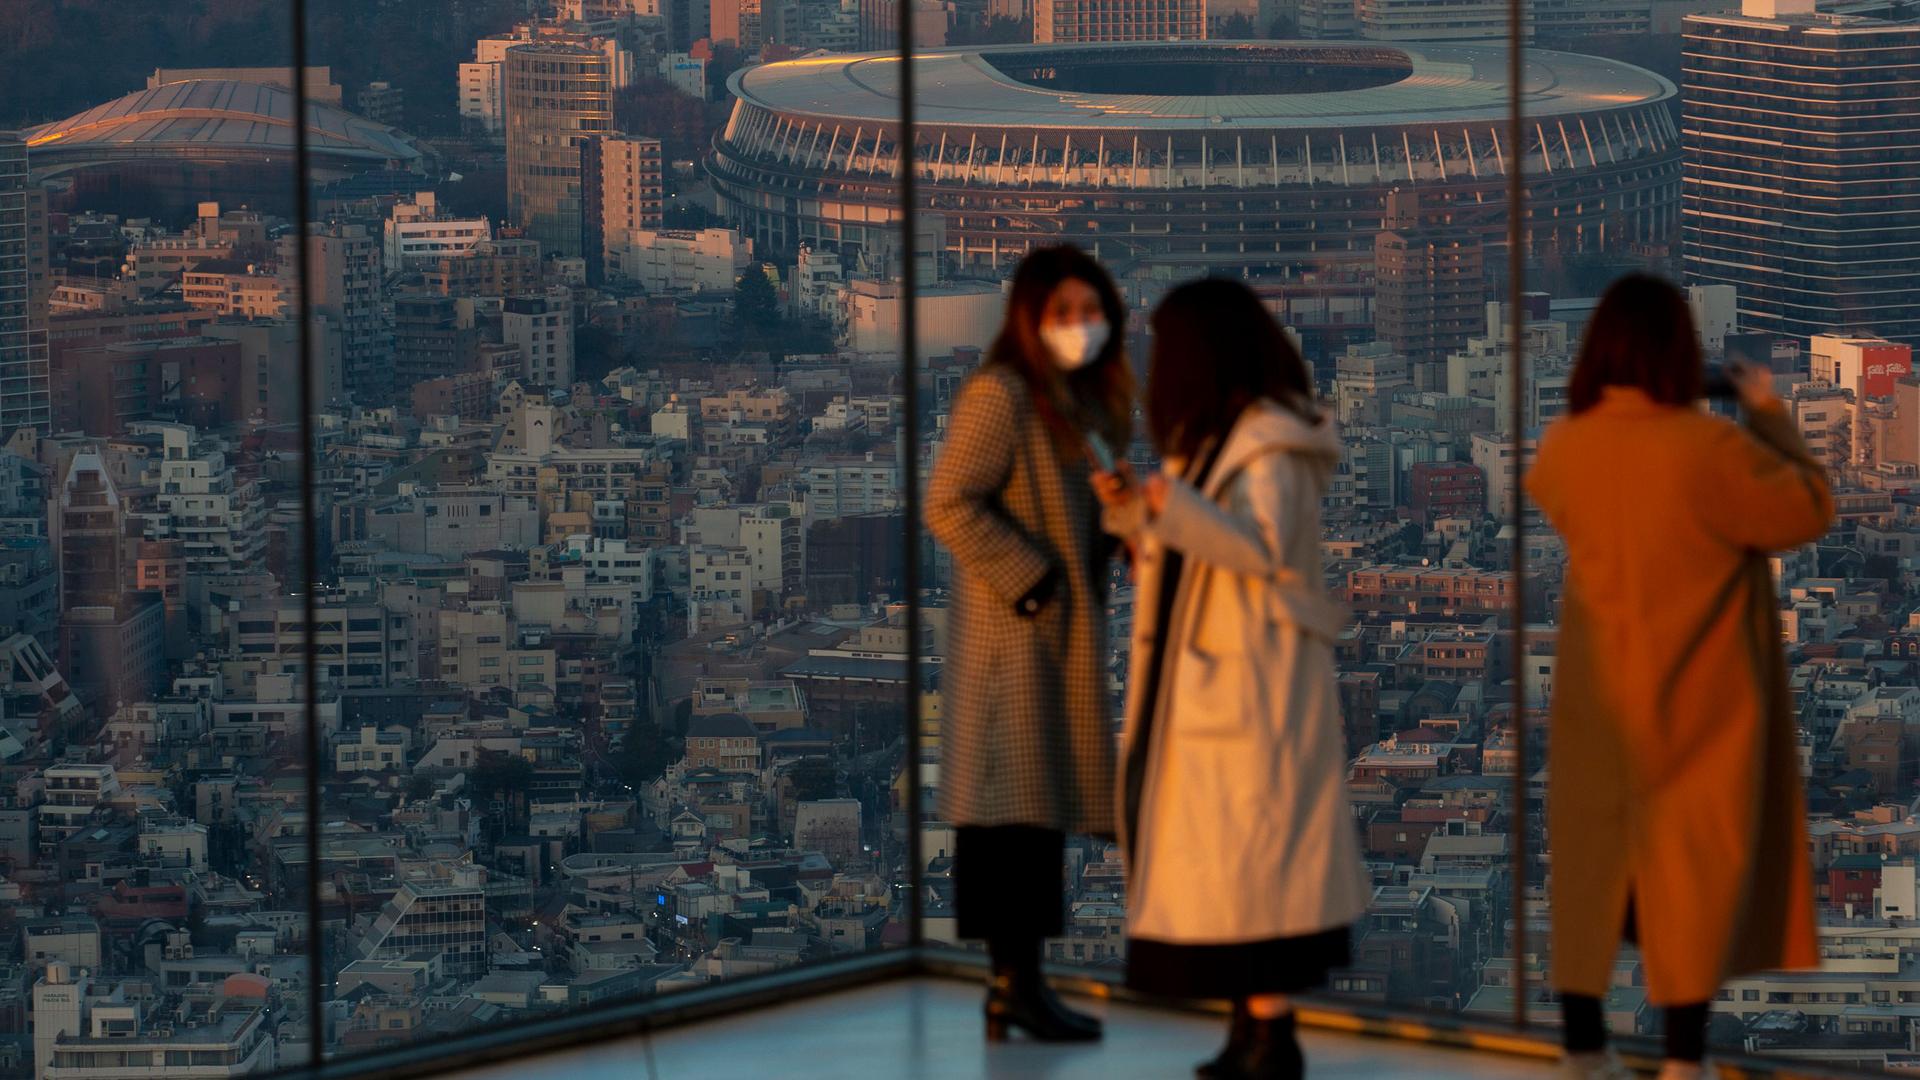 Japan National Stadium is shown in the distance from the vantage of a glass observatory where three women are standing.